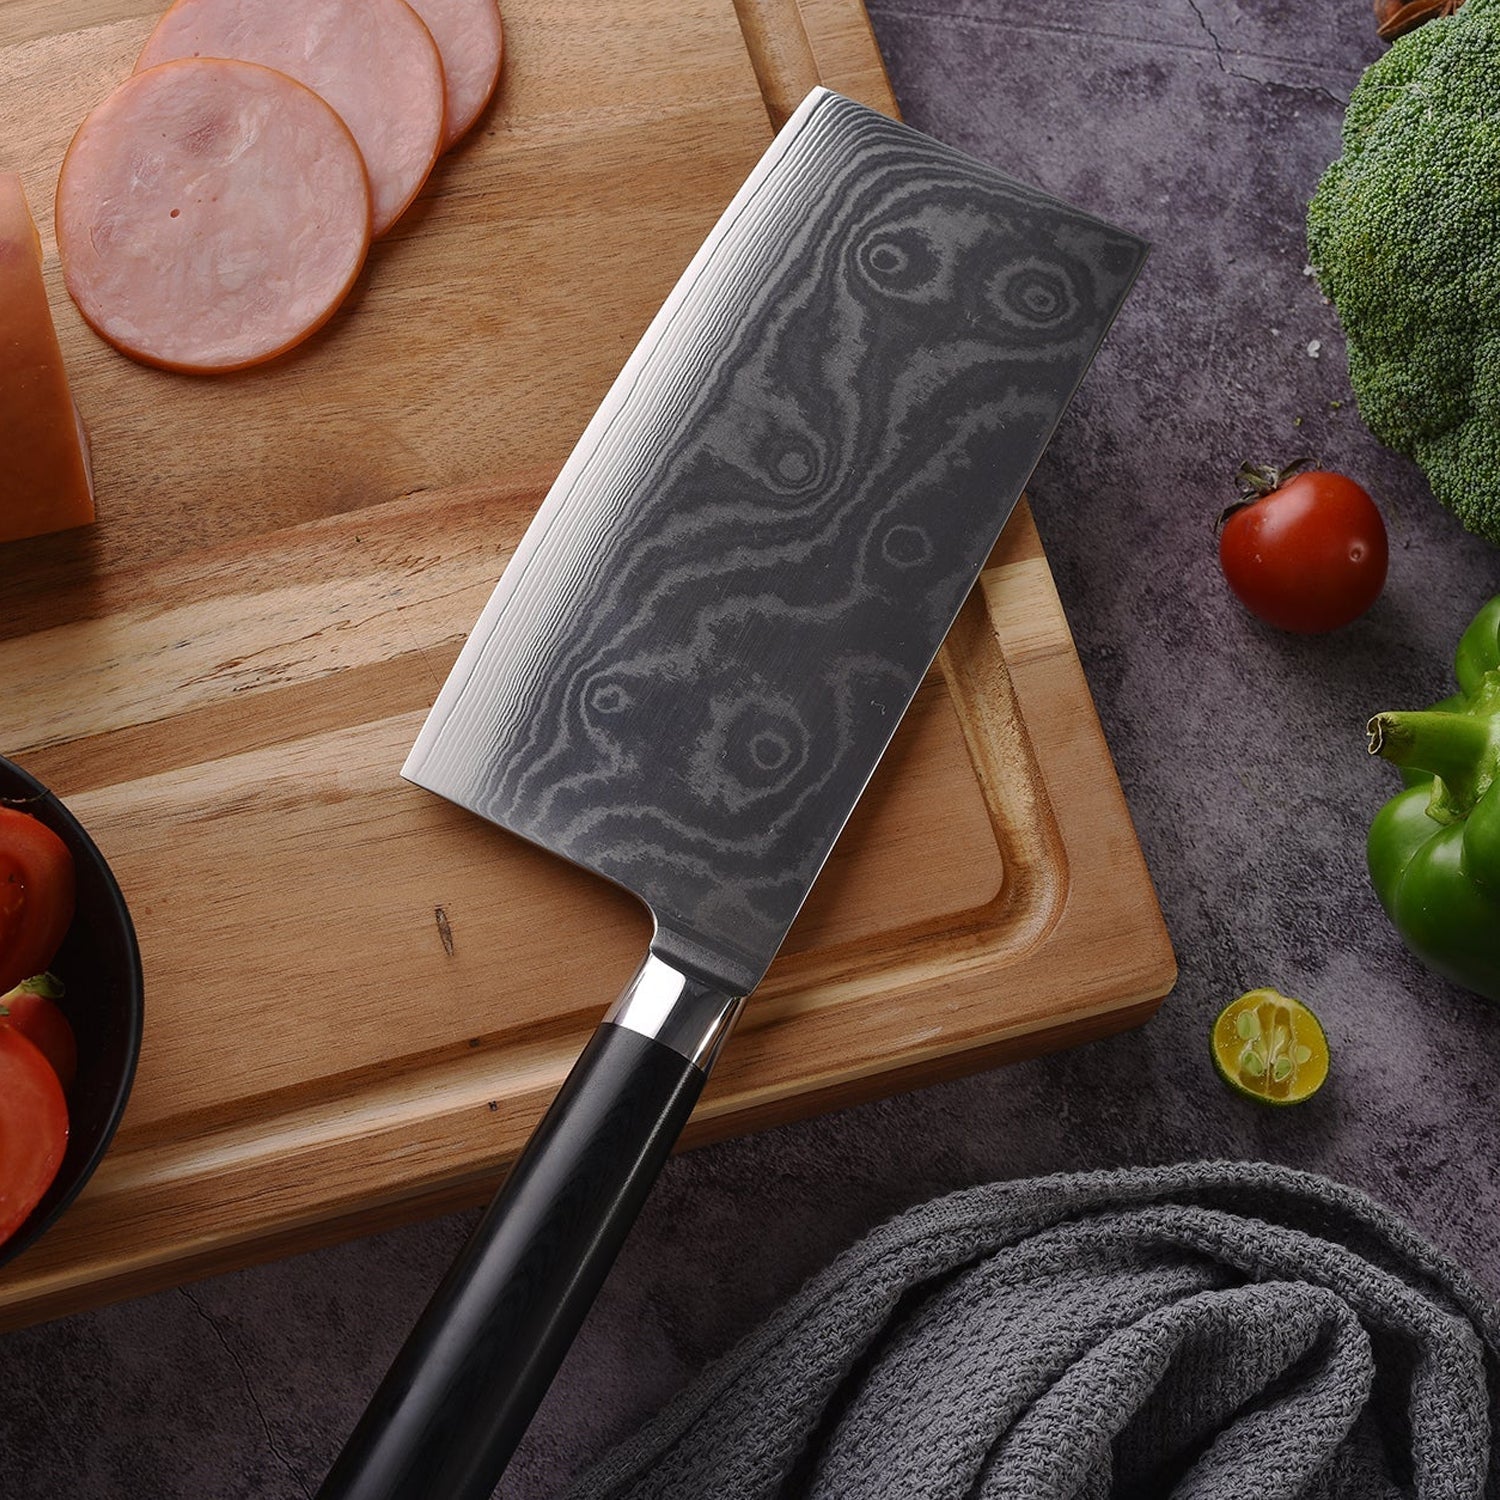 5735 Stainless Steel Chef Damascus Cleaver Vegetable Knife with Plastic Handle & Cover, Multipurpose Use for Kitchen or Restaurant (12 Inch)